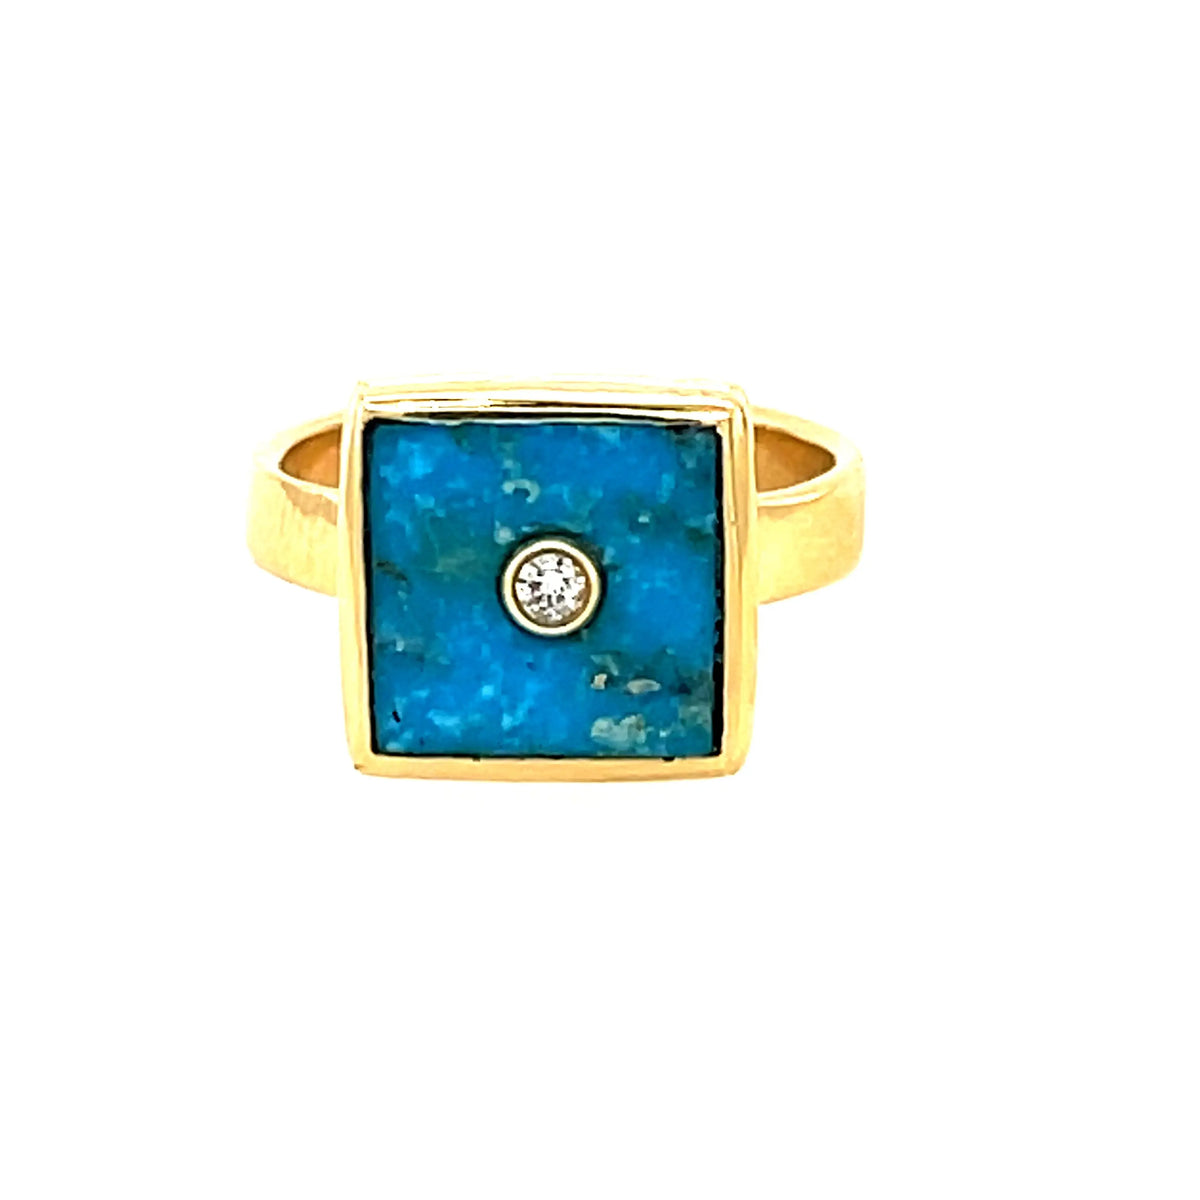 An amazing one of a kind turquoise ring!  14k yellow gold Turquoise and diamond ring  Size 6.25  Exclusive from Stevie&#39;s Jewel Box